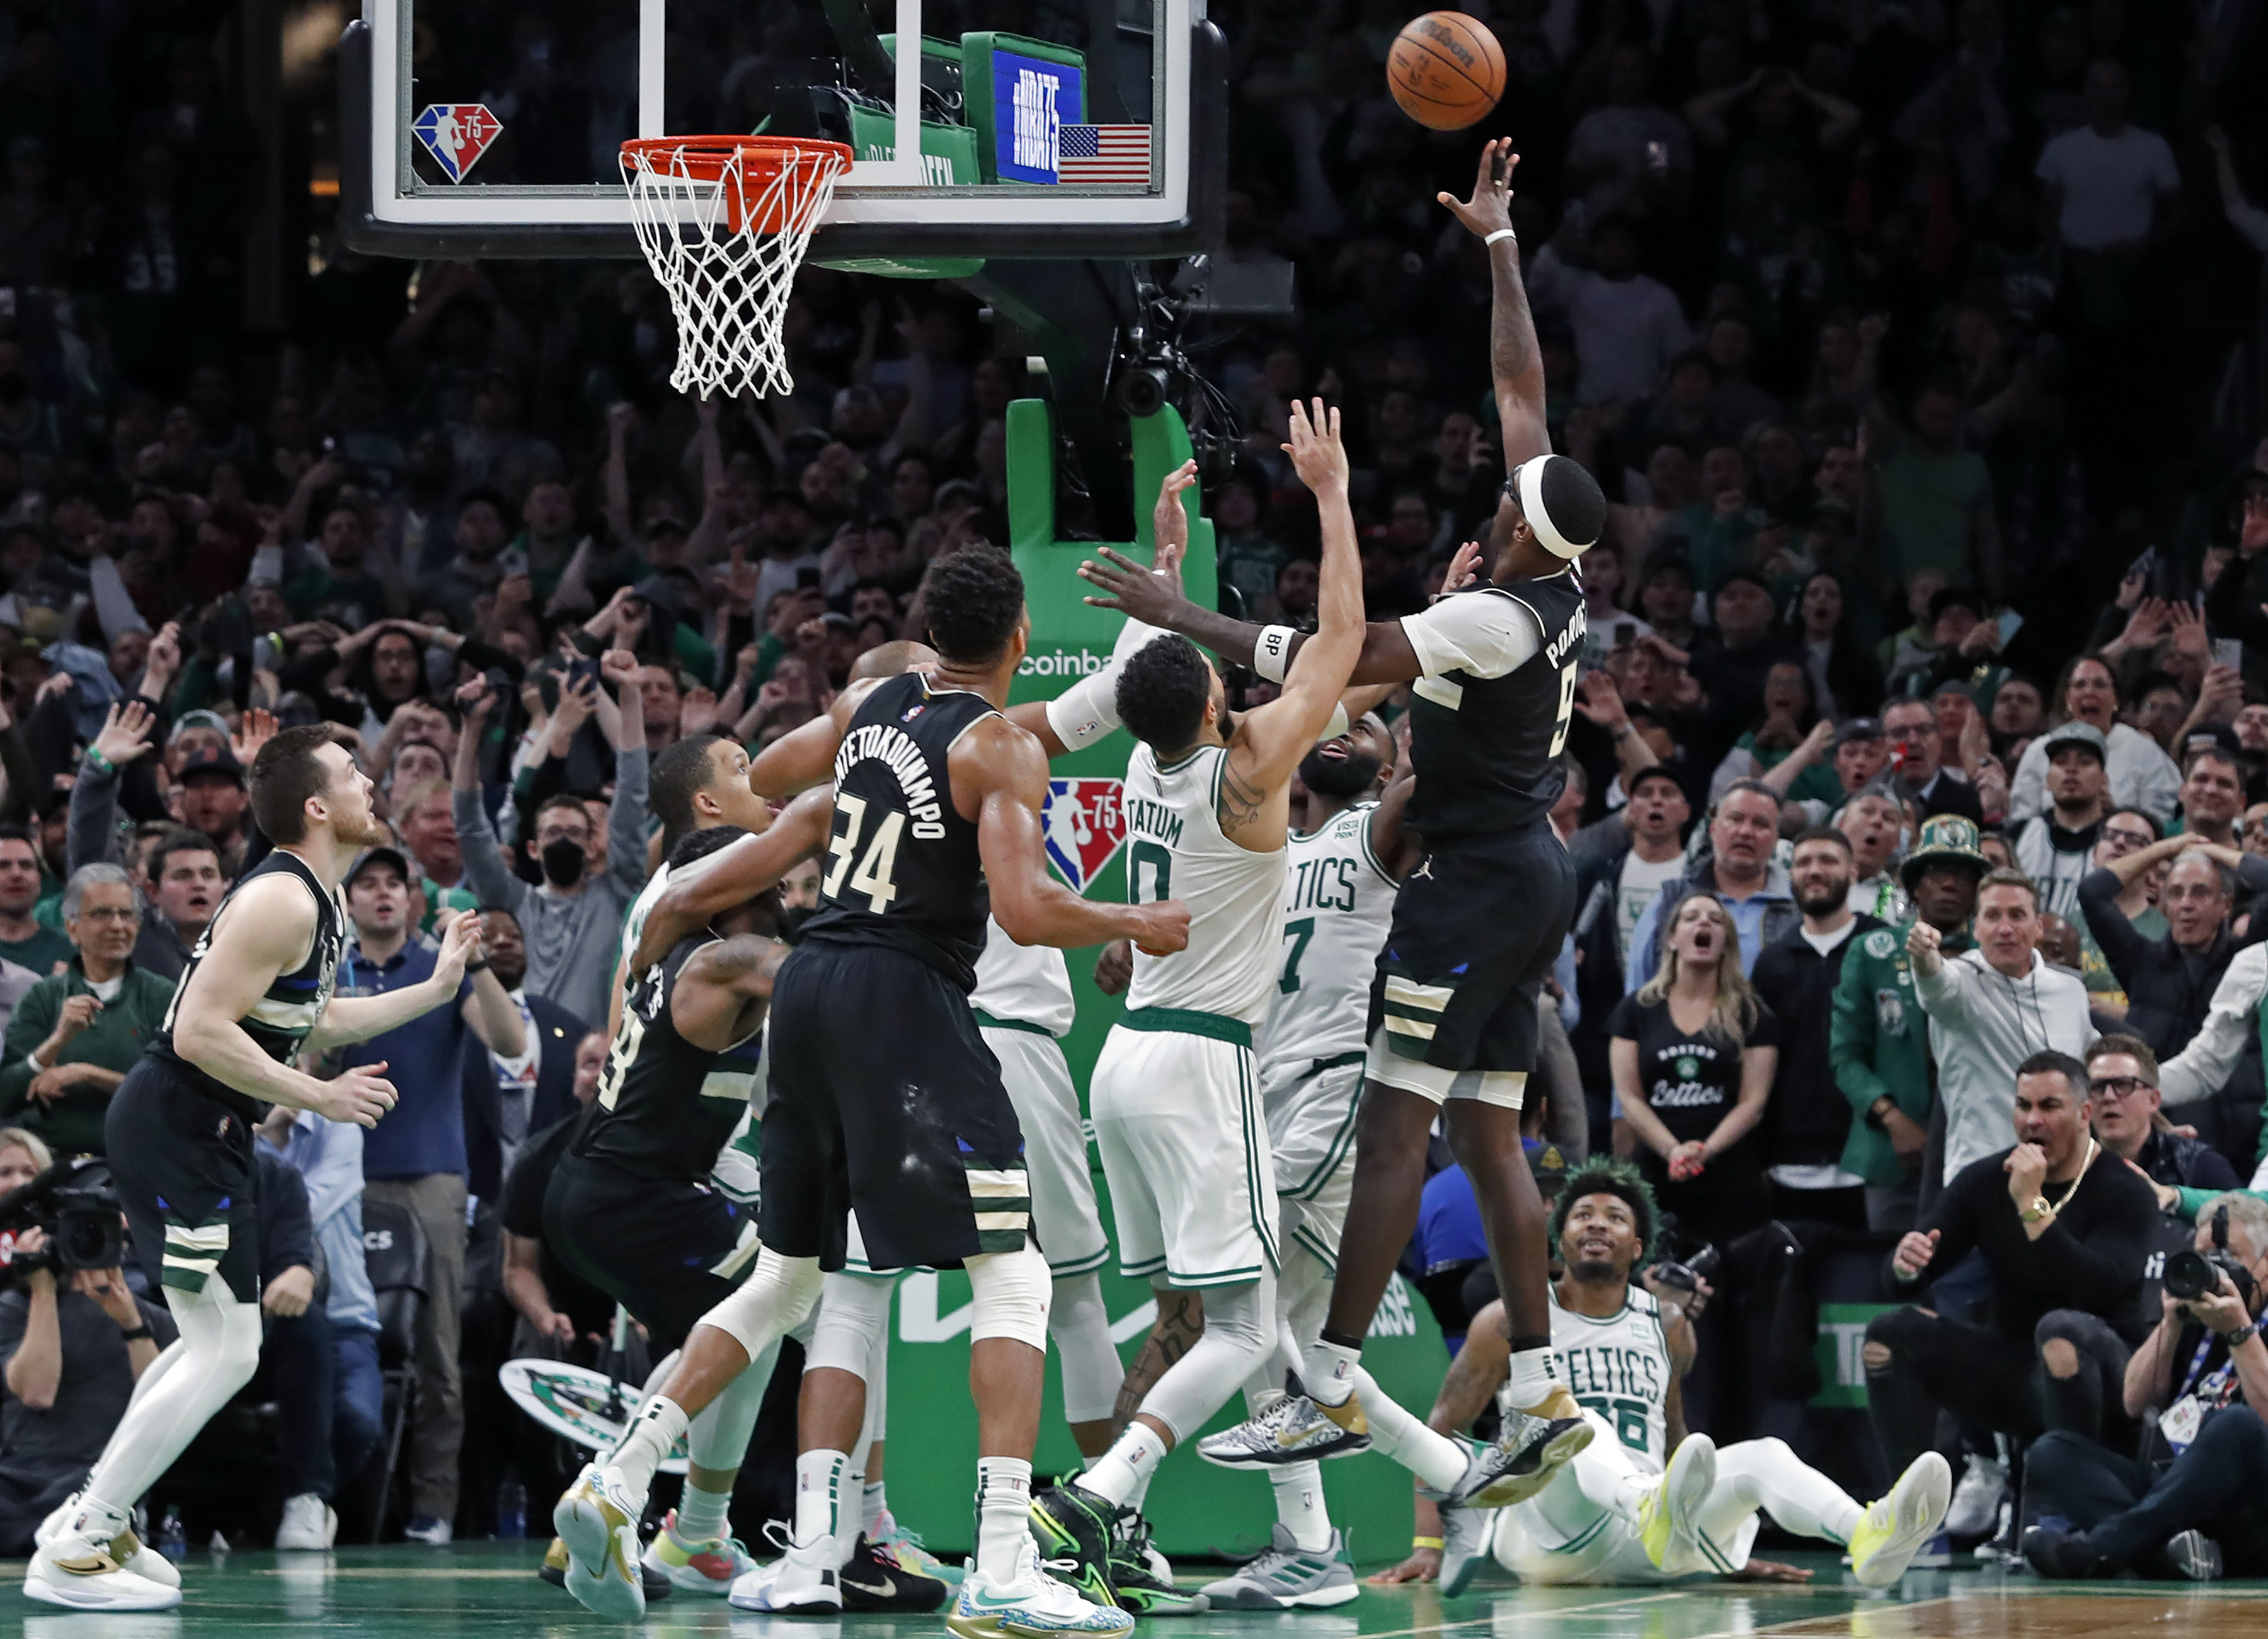 NBA referee grades in crunch time will now be made public